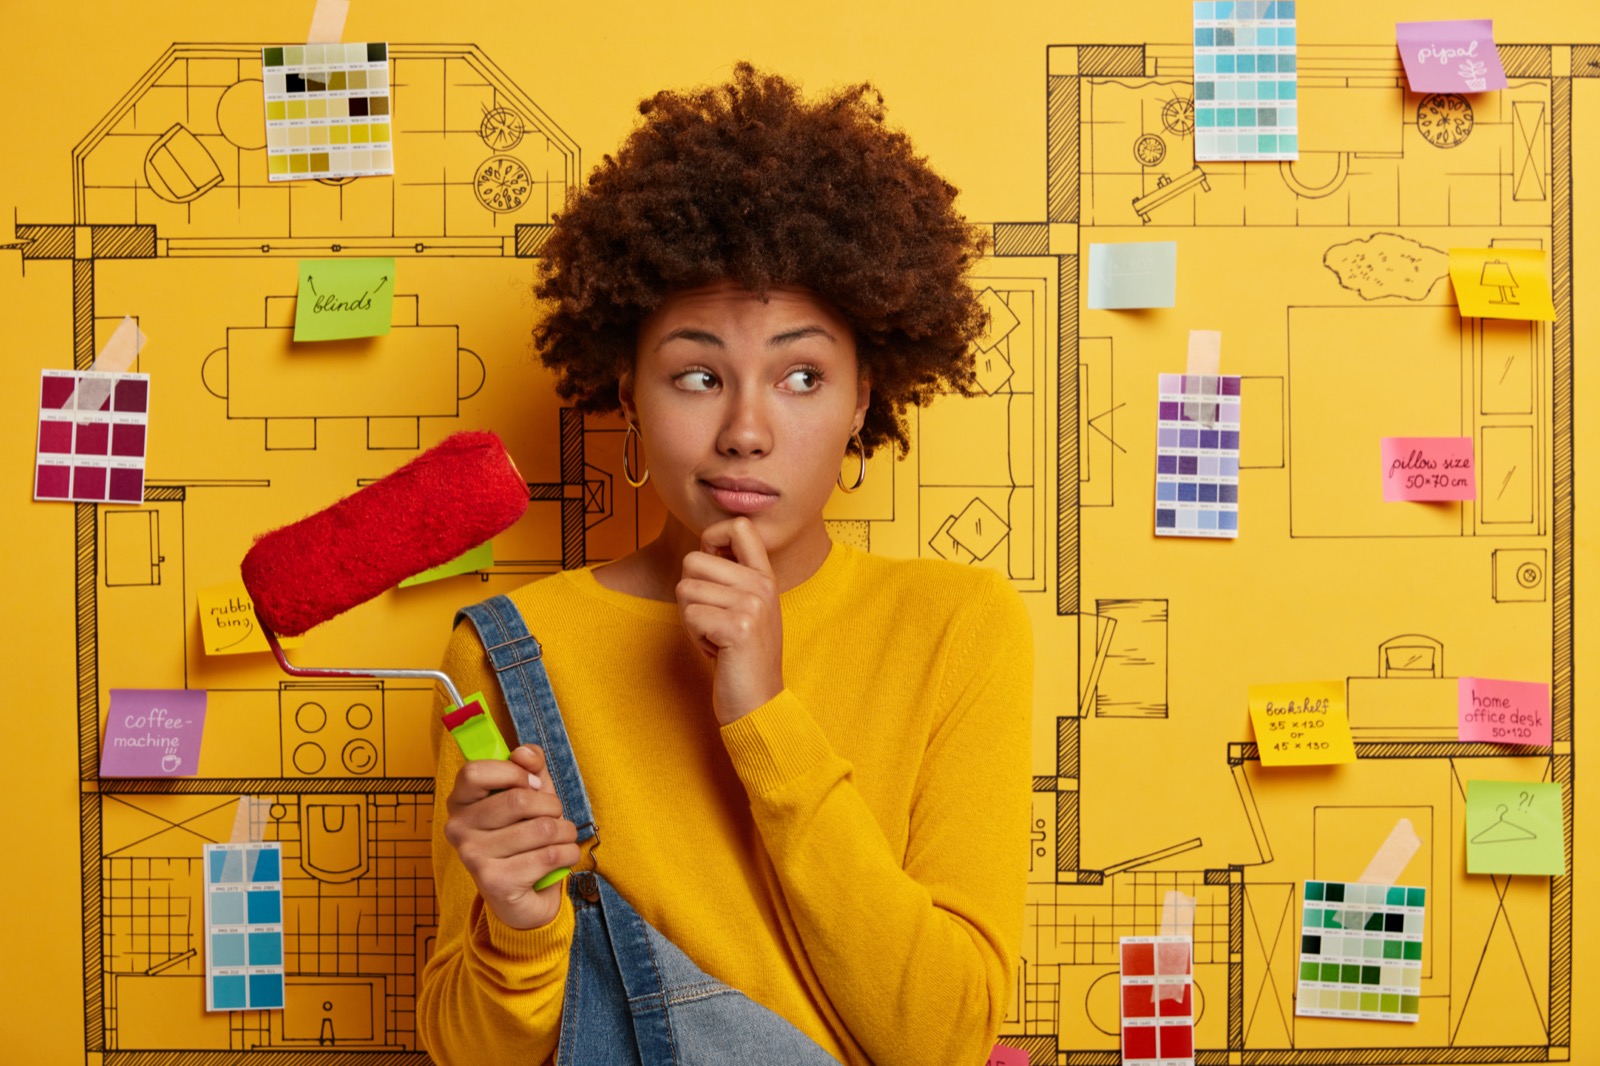 Can You Match These Definitions to the Words That Every 12-Year-Old Already Knows? House Redecoration Concept. Pensive Afro American Woman Holds Chin, Considers Something, Uses Paint Roller, Wears Yellow Sweater, Thinks About Repair, Poses Against Home Sketch With Sticky Notes